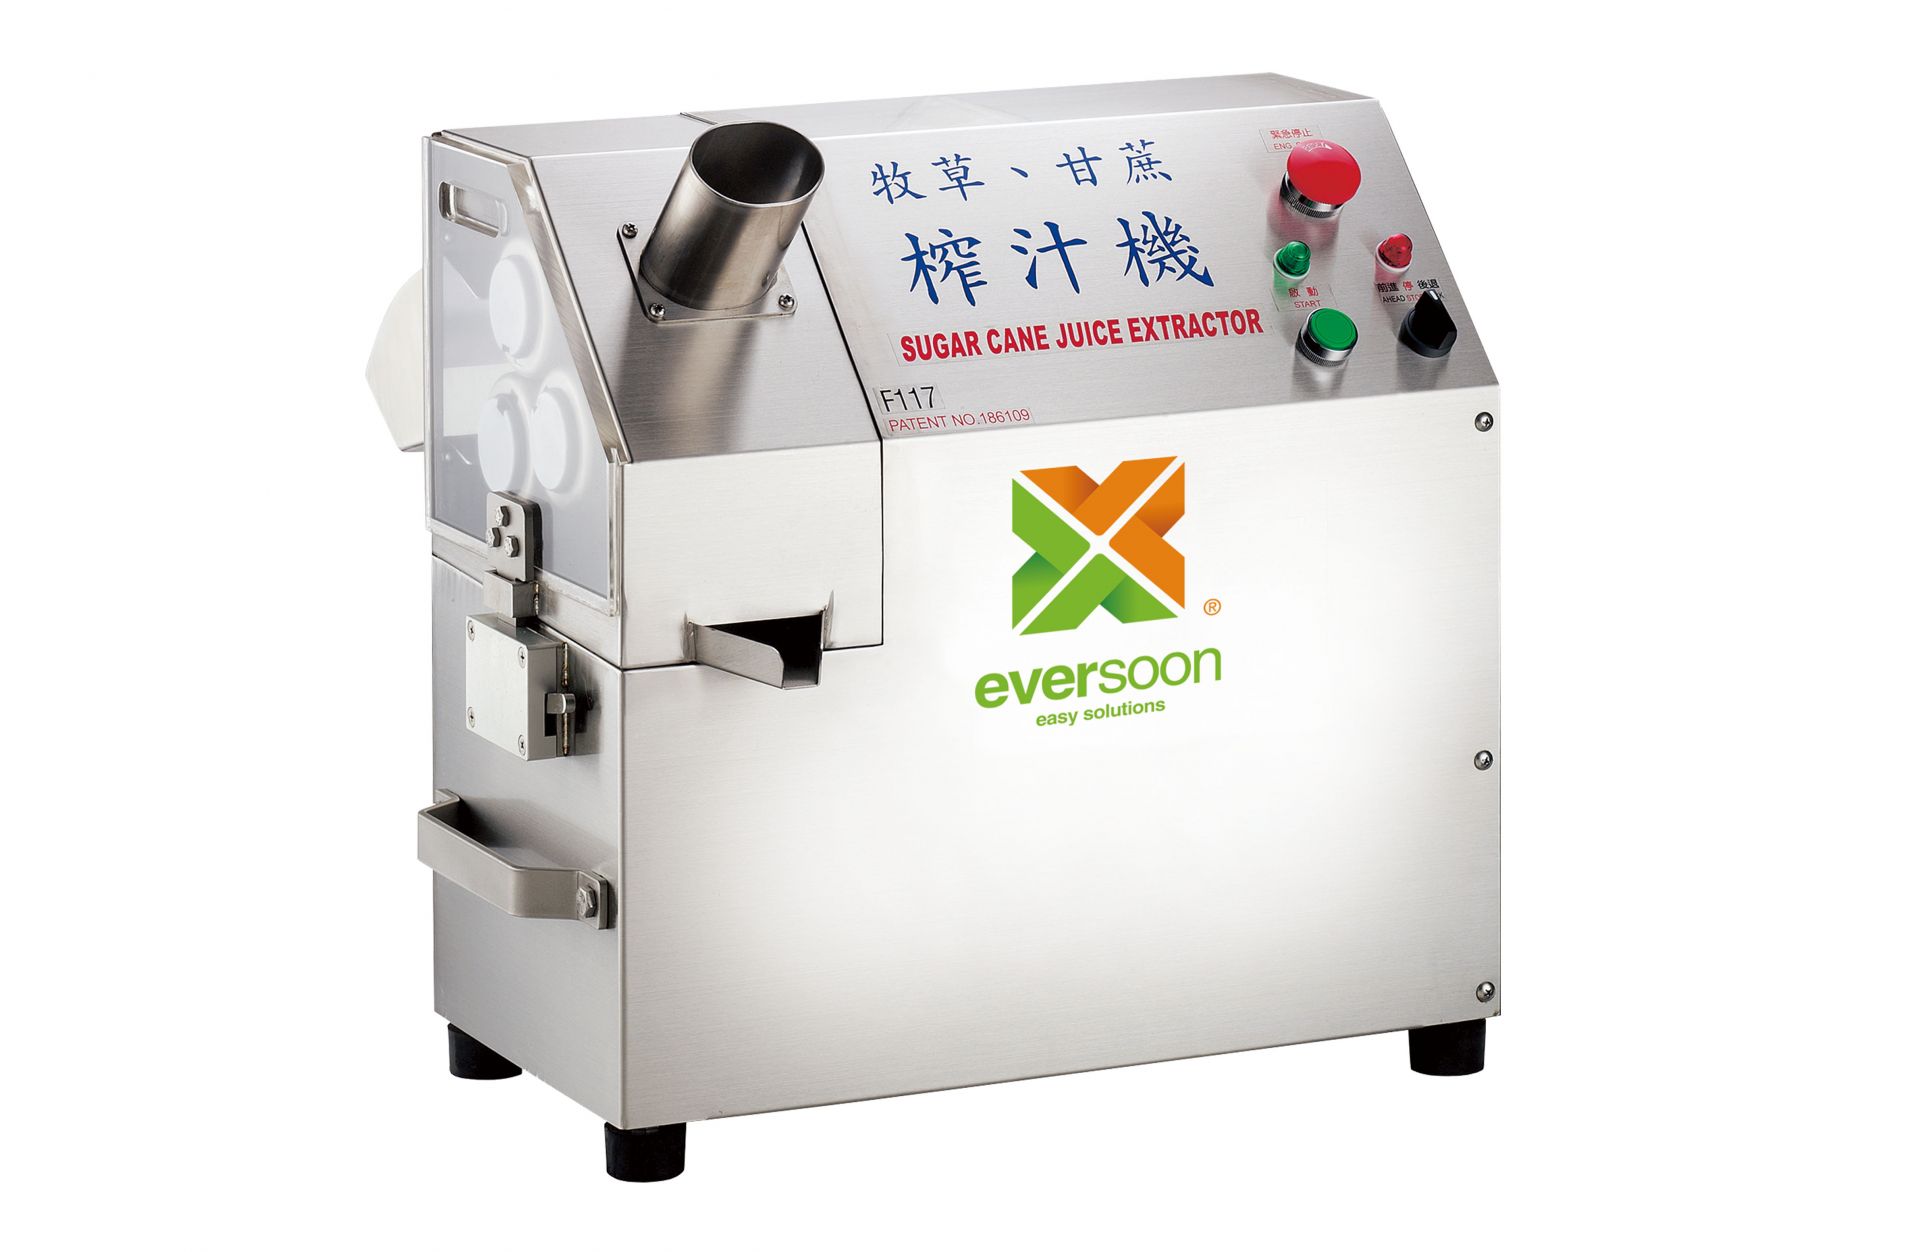 Herbage & Sugar Cane Juice Machine - Sugar Cane Juice extractor including fixed feeding inlets, safety buckles and covers, it can prevent any accidents from occurring during using it.